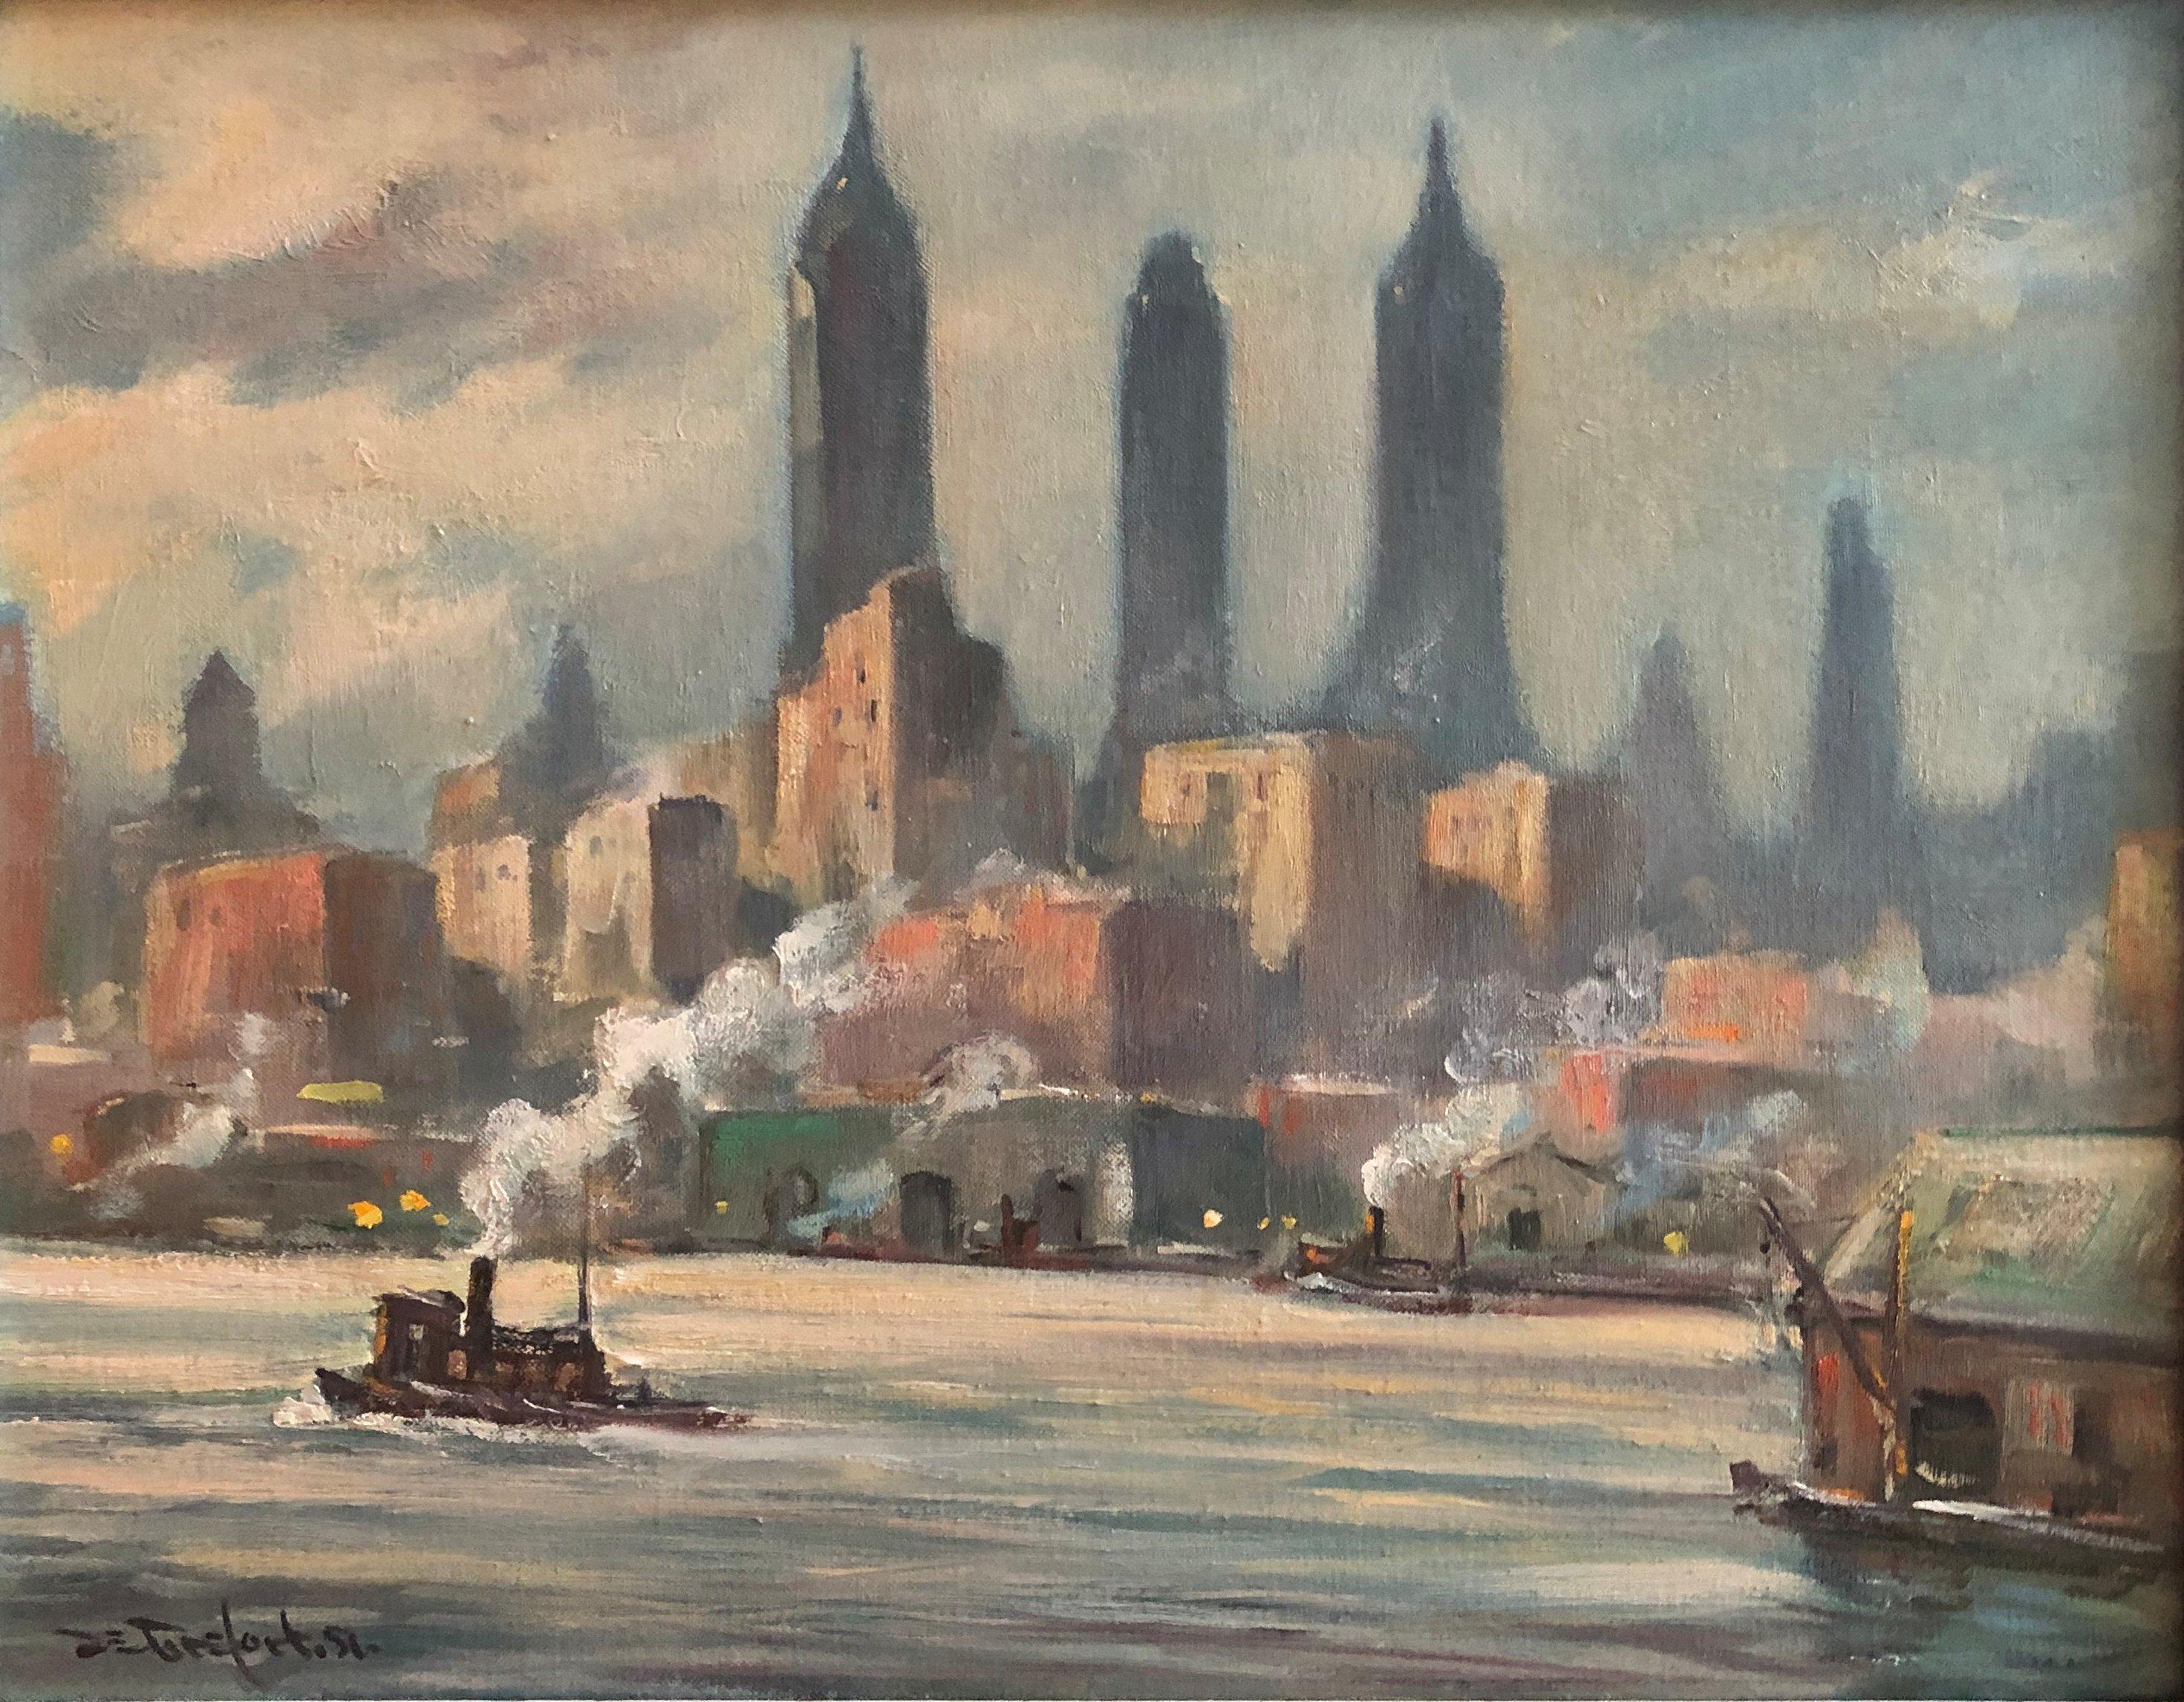 Bela de Tirefort Landscape Painting - "New York Harbor from the East River, 1951, " American Cityscape of NYC Skyline